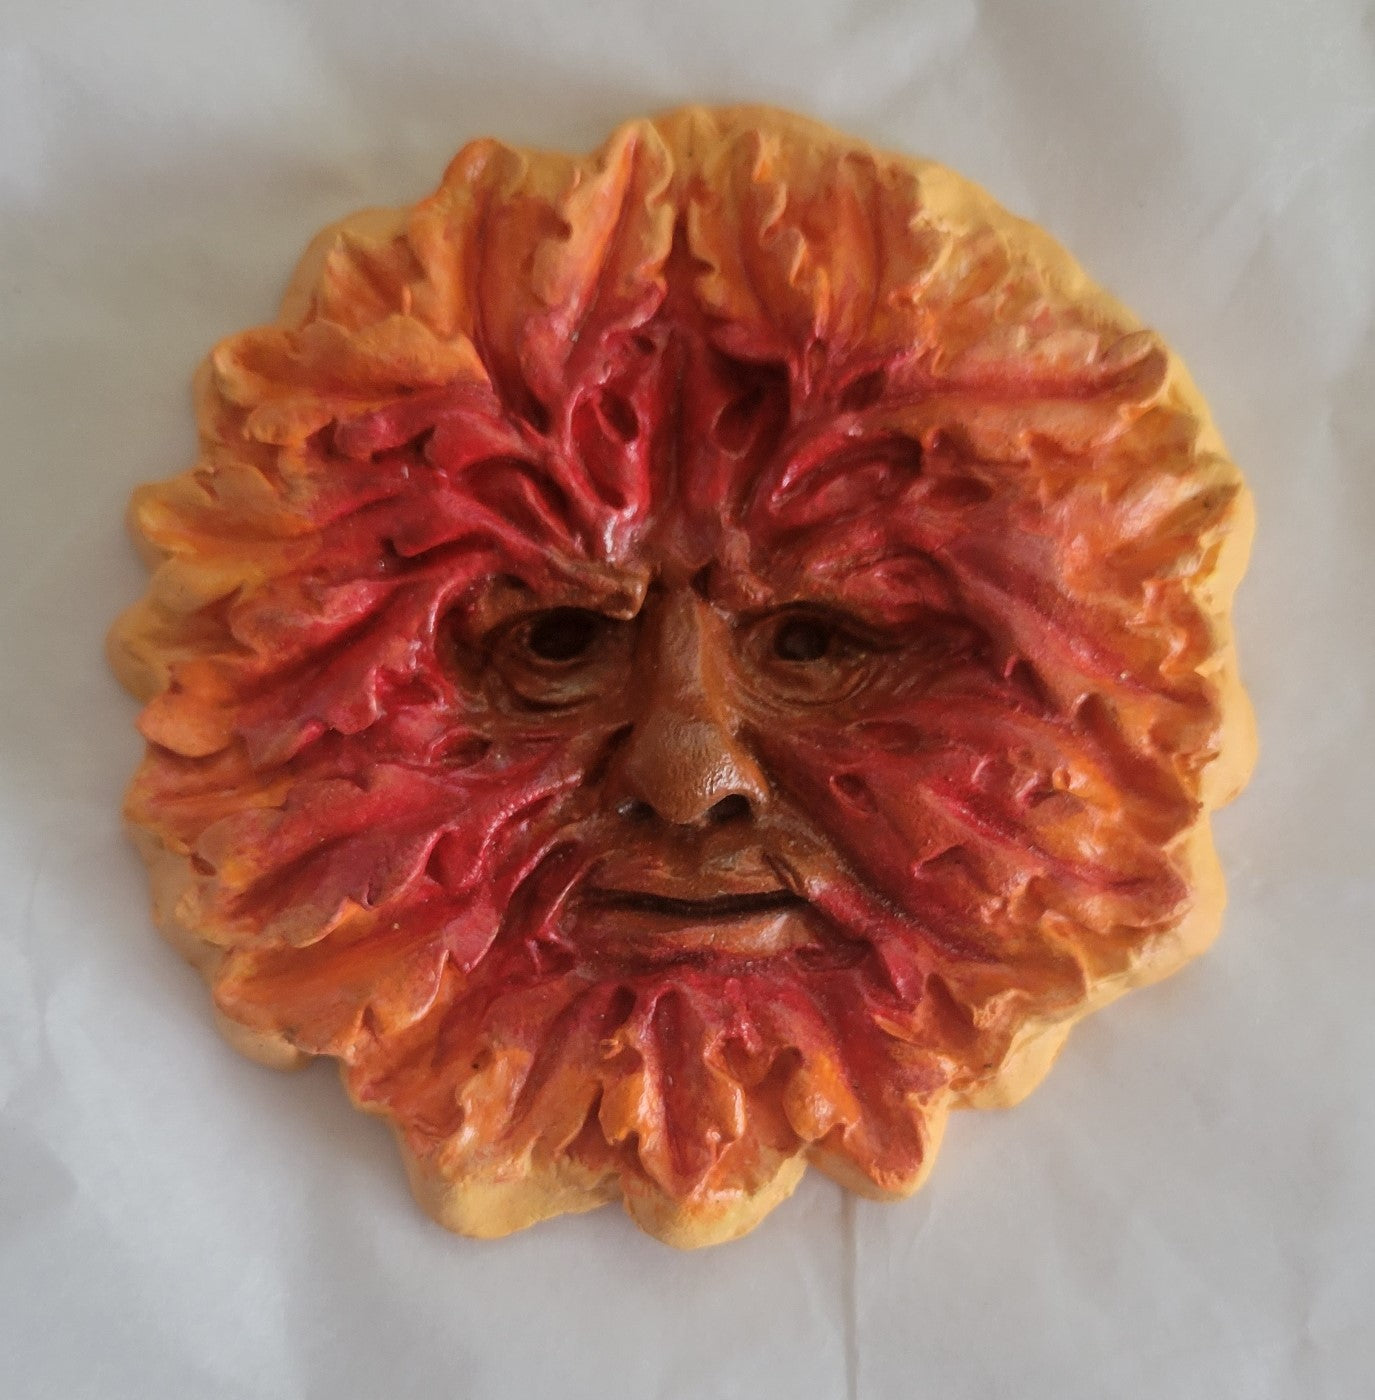 Greenman decoration, Medieval architecture, gifts for history lovers, handmade. Orange / autumn colors